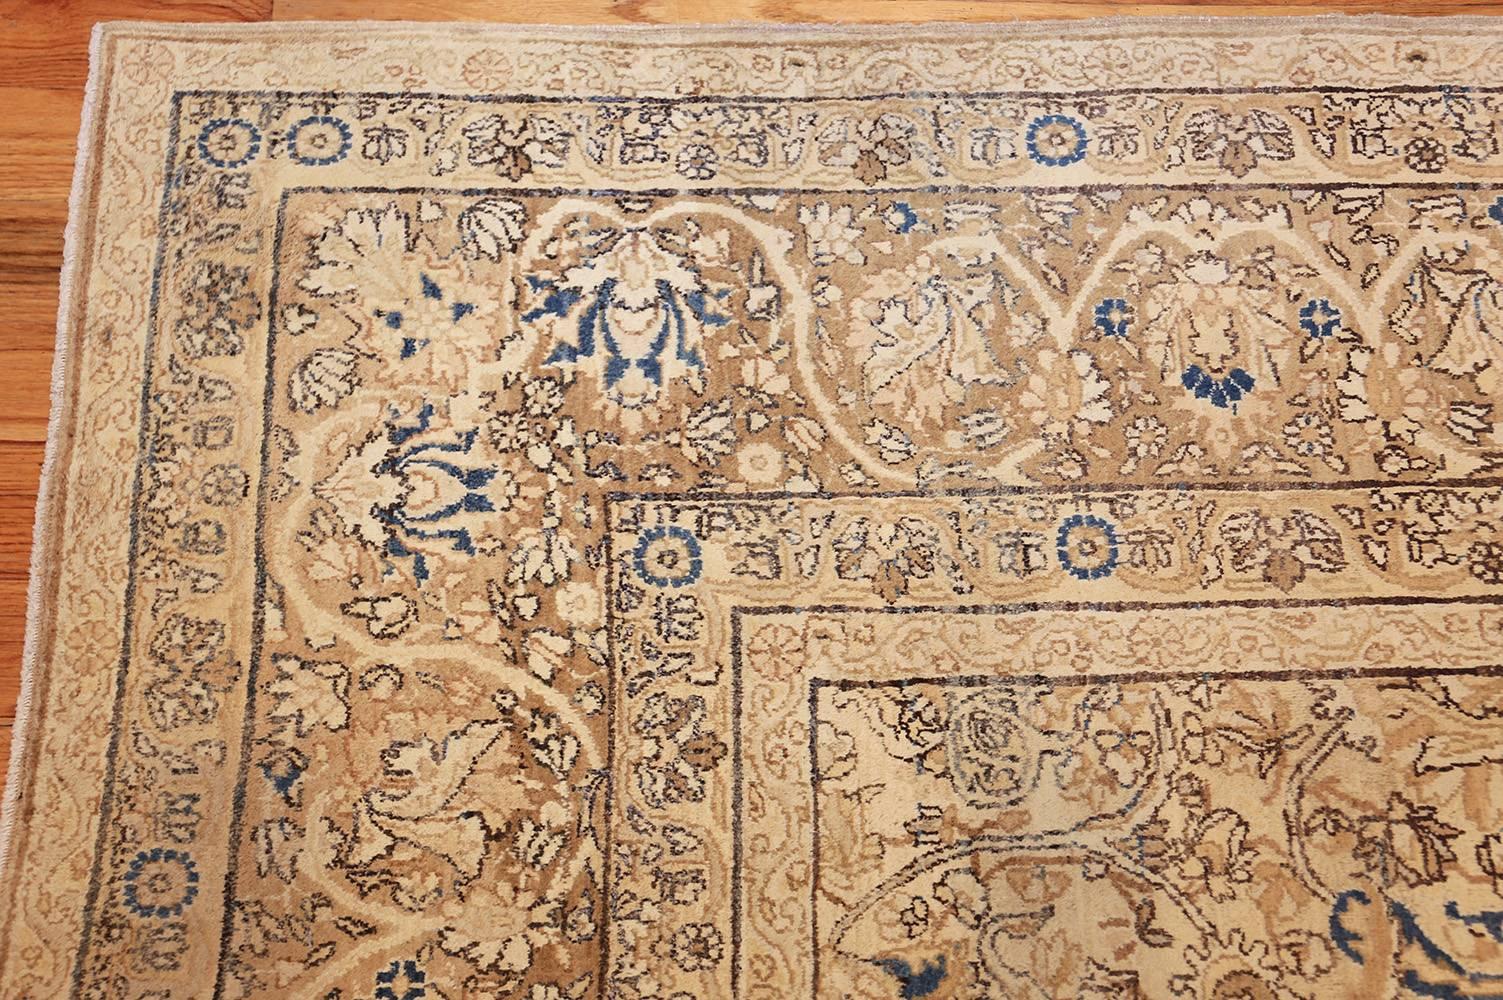 Hand-Knotted Antique Persian Kerman Rug. Size: 8 ft 10 in x 12 ft (2.69 m x 3.66 m)